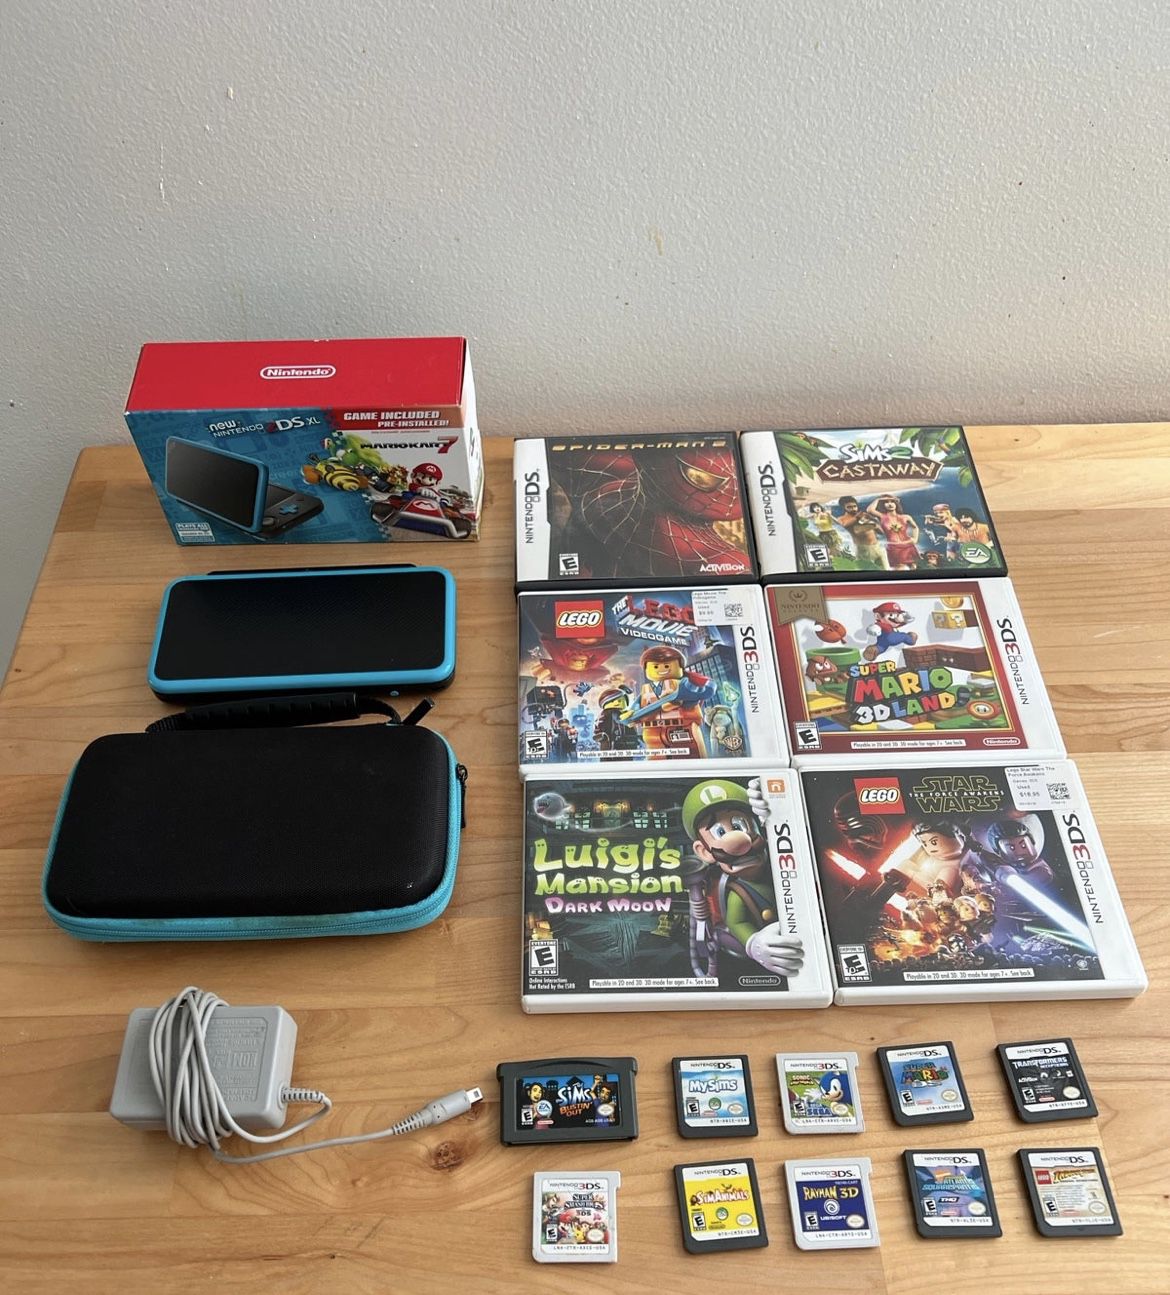 New Nintendo 2DS XL Mario Kart 7 Bundle in Black, Turquoise with extras